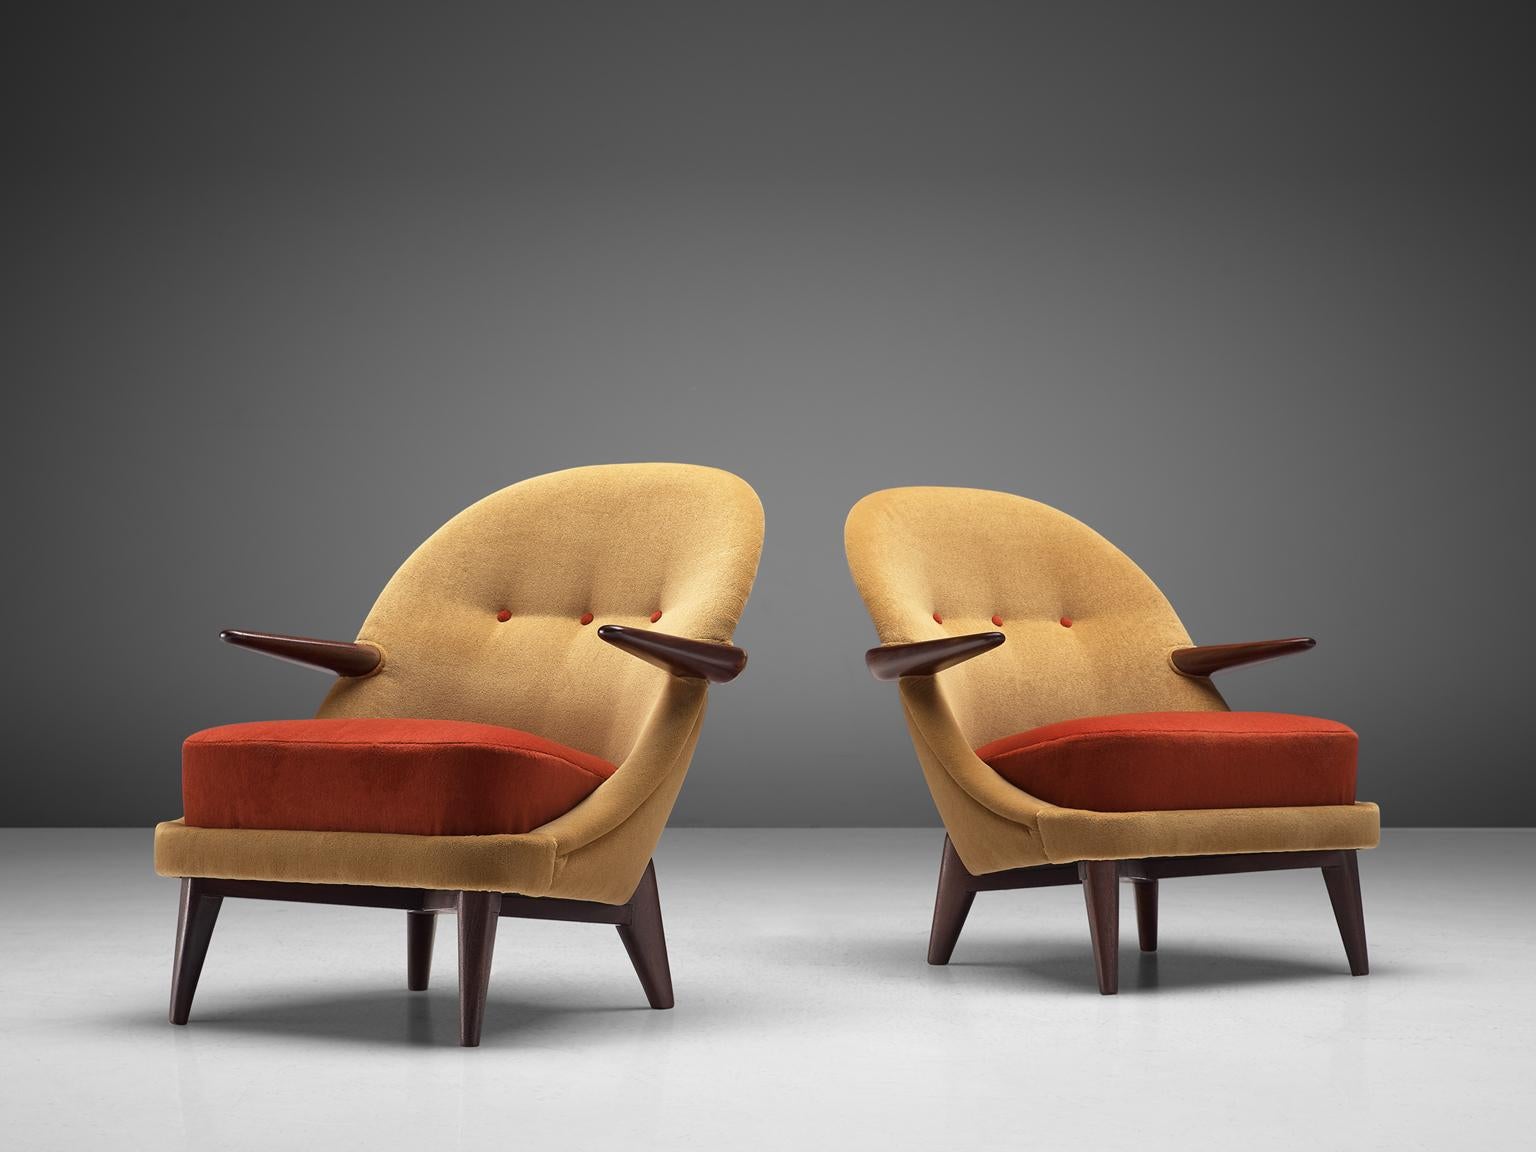 Easy chairs, velvet and darkened oak, Denmark, 1960s

Quirky pair of reupholstered easy chairs from Denmark. This model features a seat shaped as a shell. Within the shell, a red cushion is placed as the seat. Short, pointy armrests in wood are